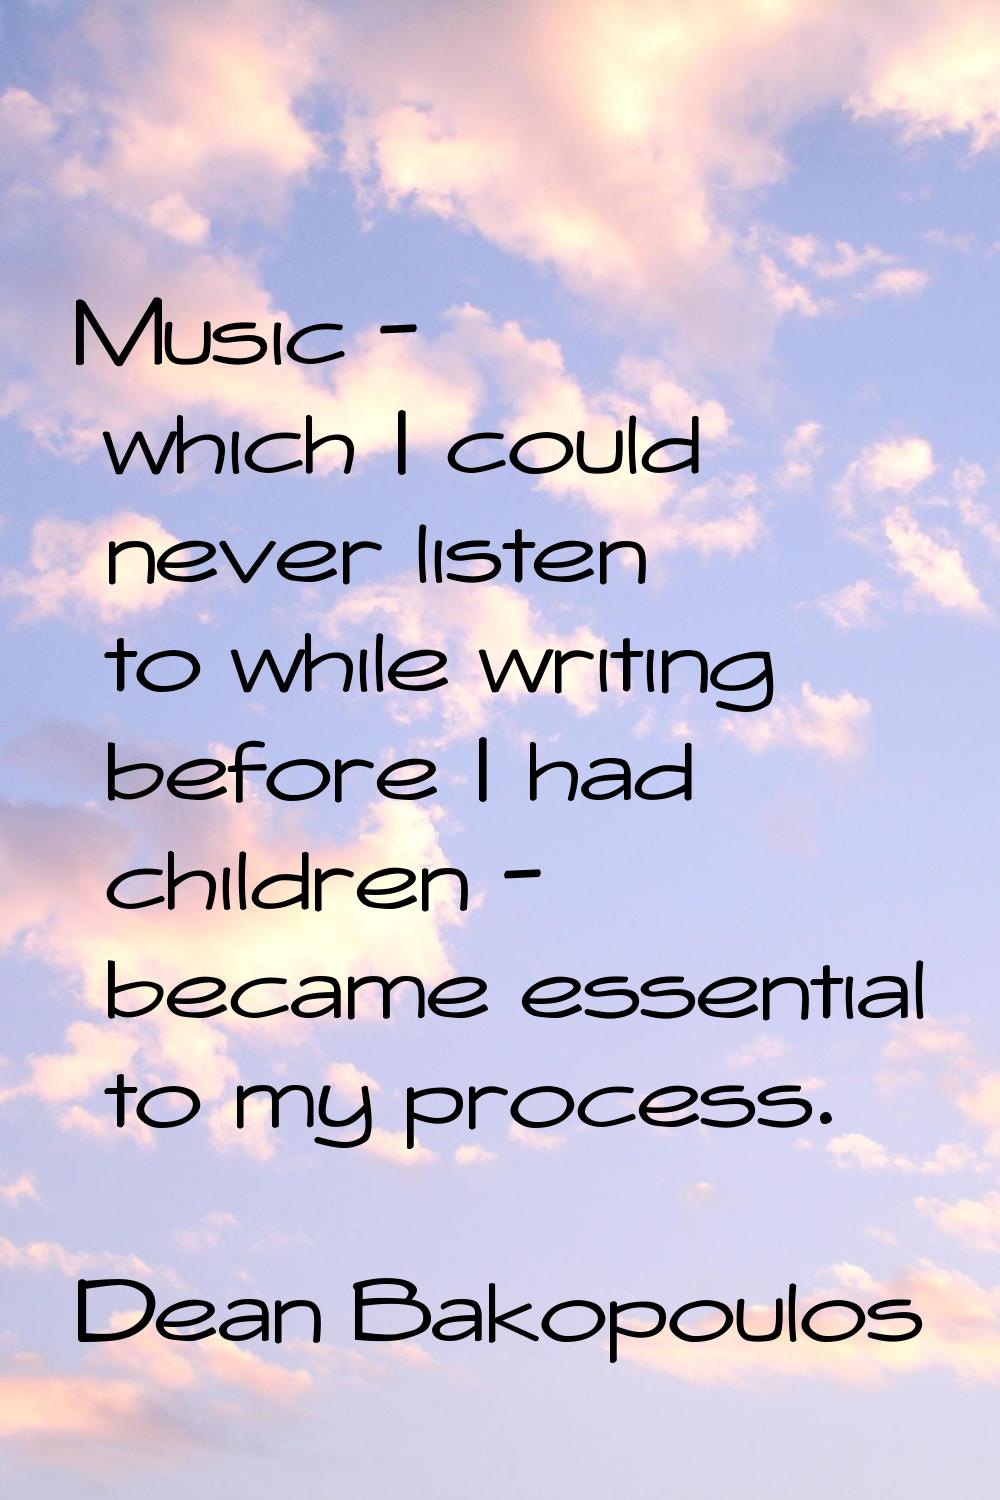 Music - which I could never listen to while writing before I had children - became essential to my 